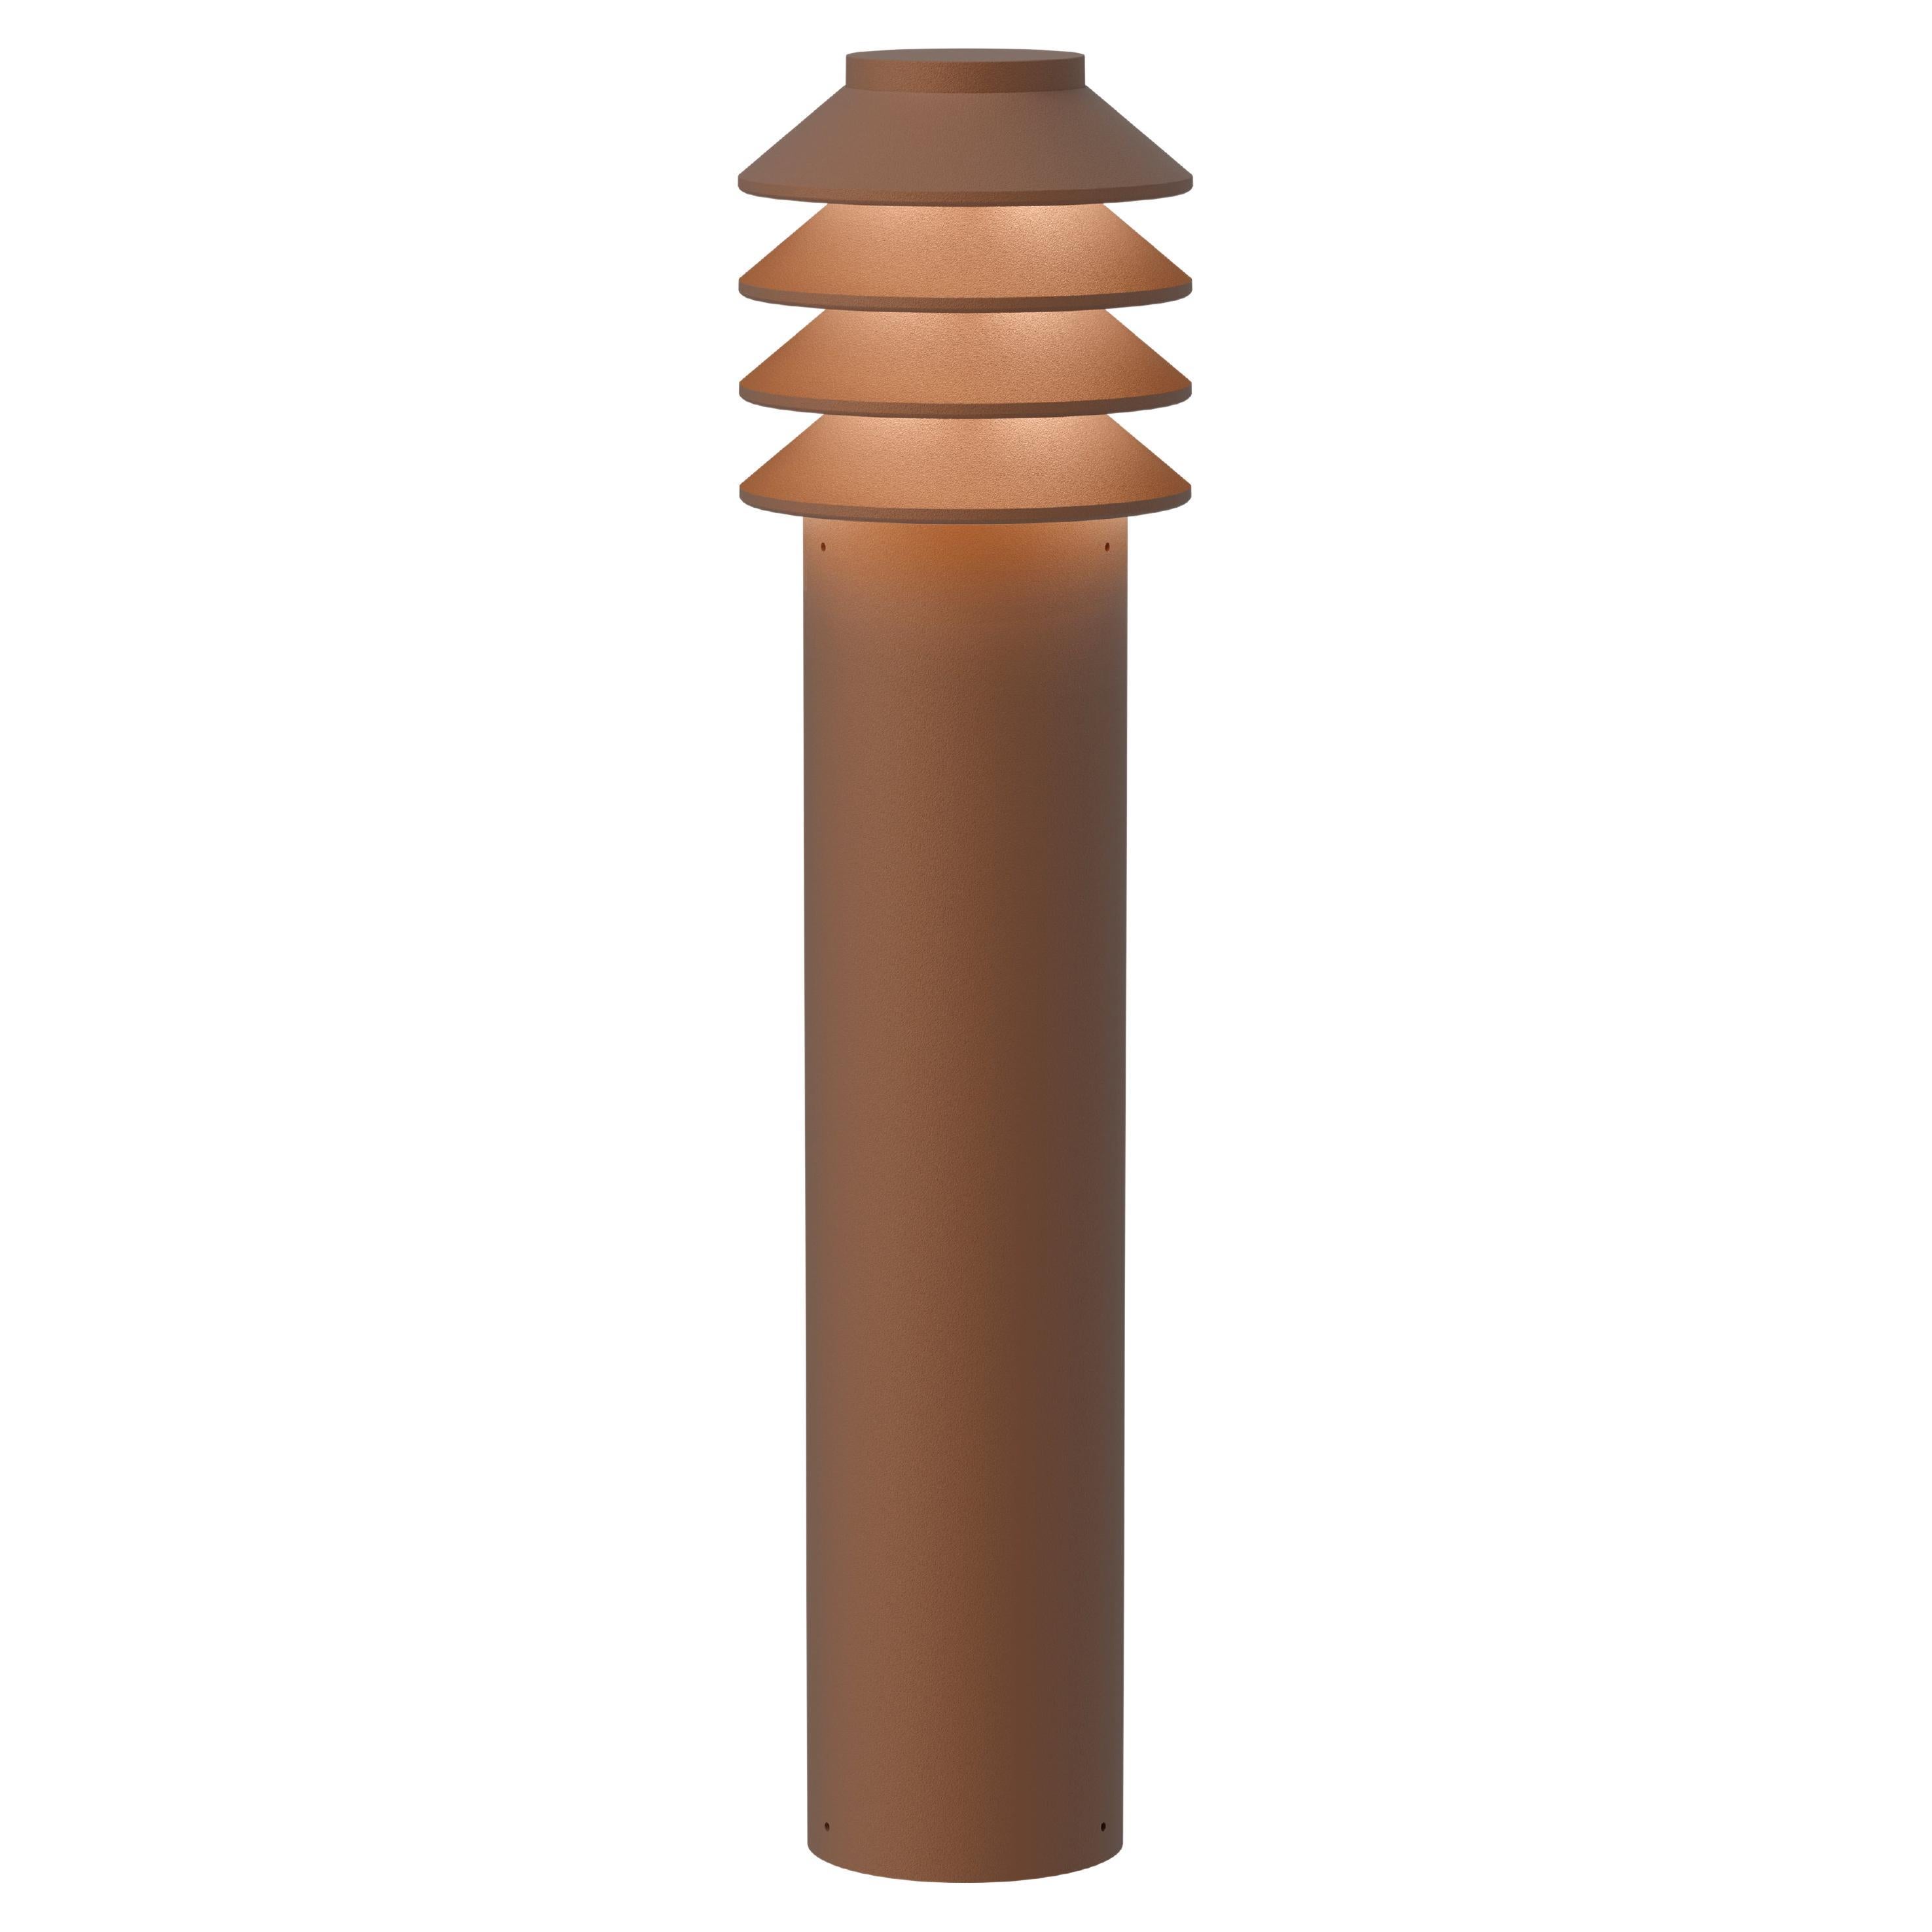 Bysted Garden Long' Outdoor Bollard Light for Louis Poulsen in Corten Red  For Sale at 1stDibs